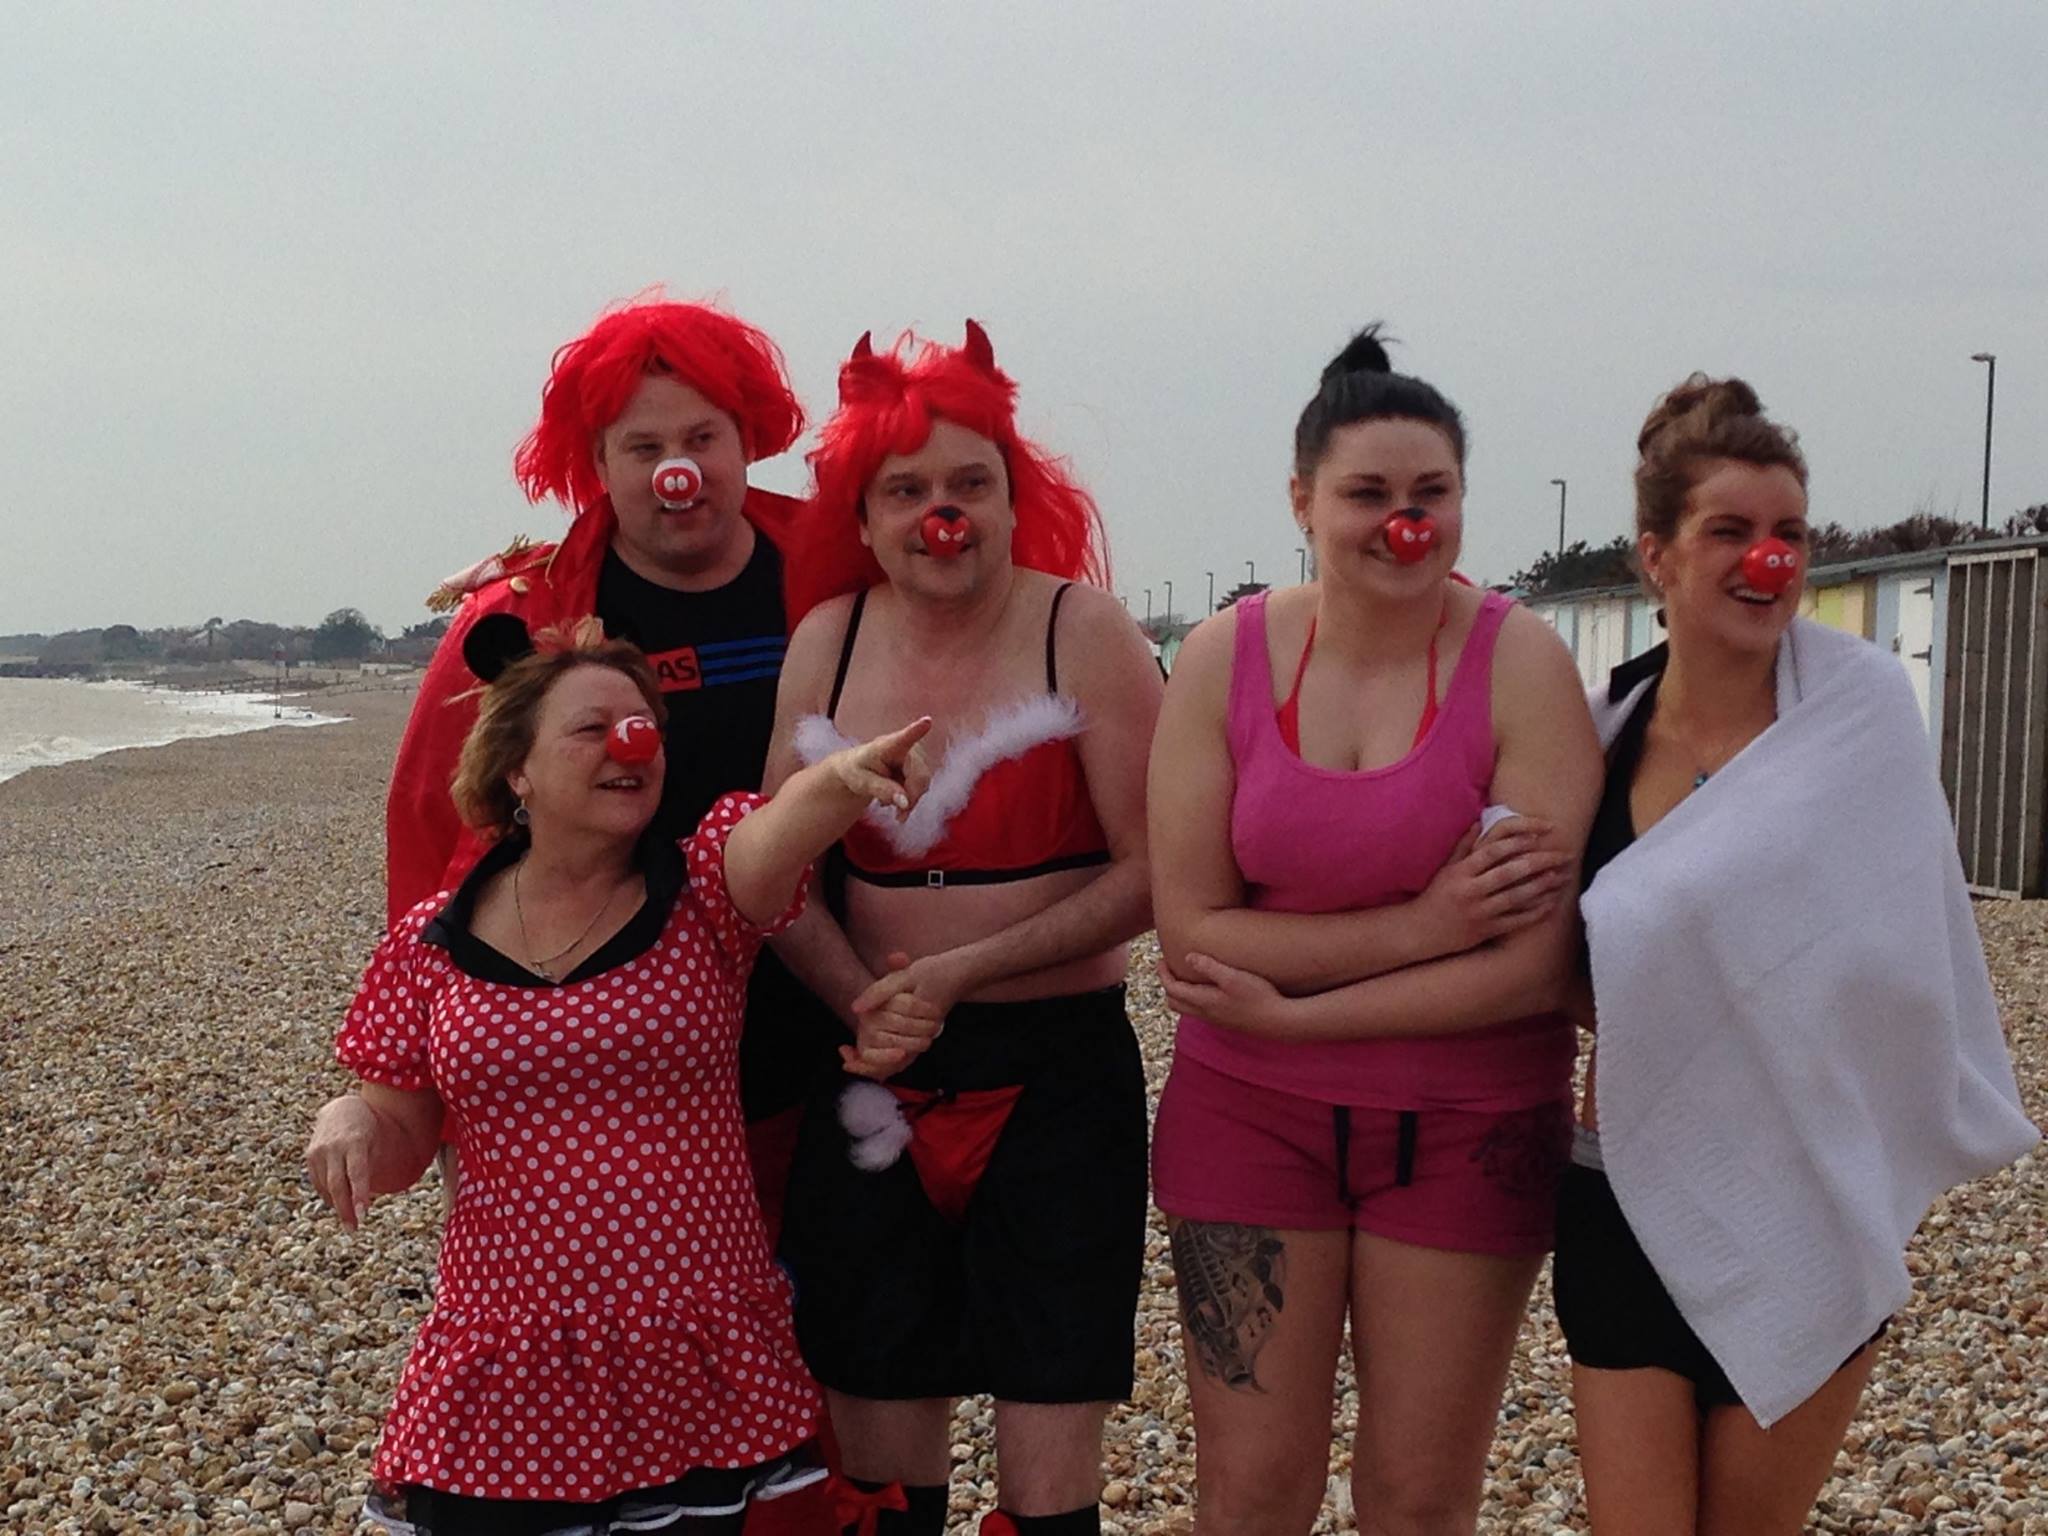 Royal Bay Residential Care Home staff doing a Red Nose Day swim